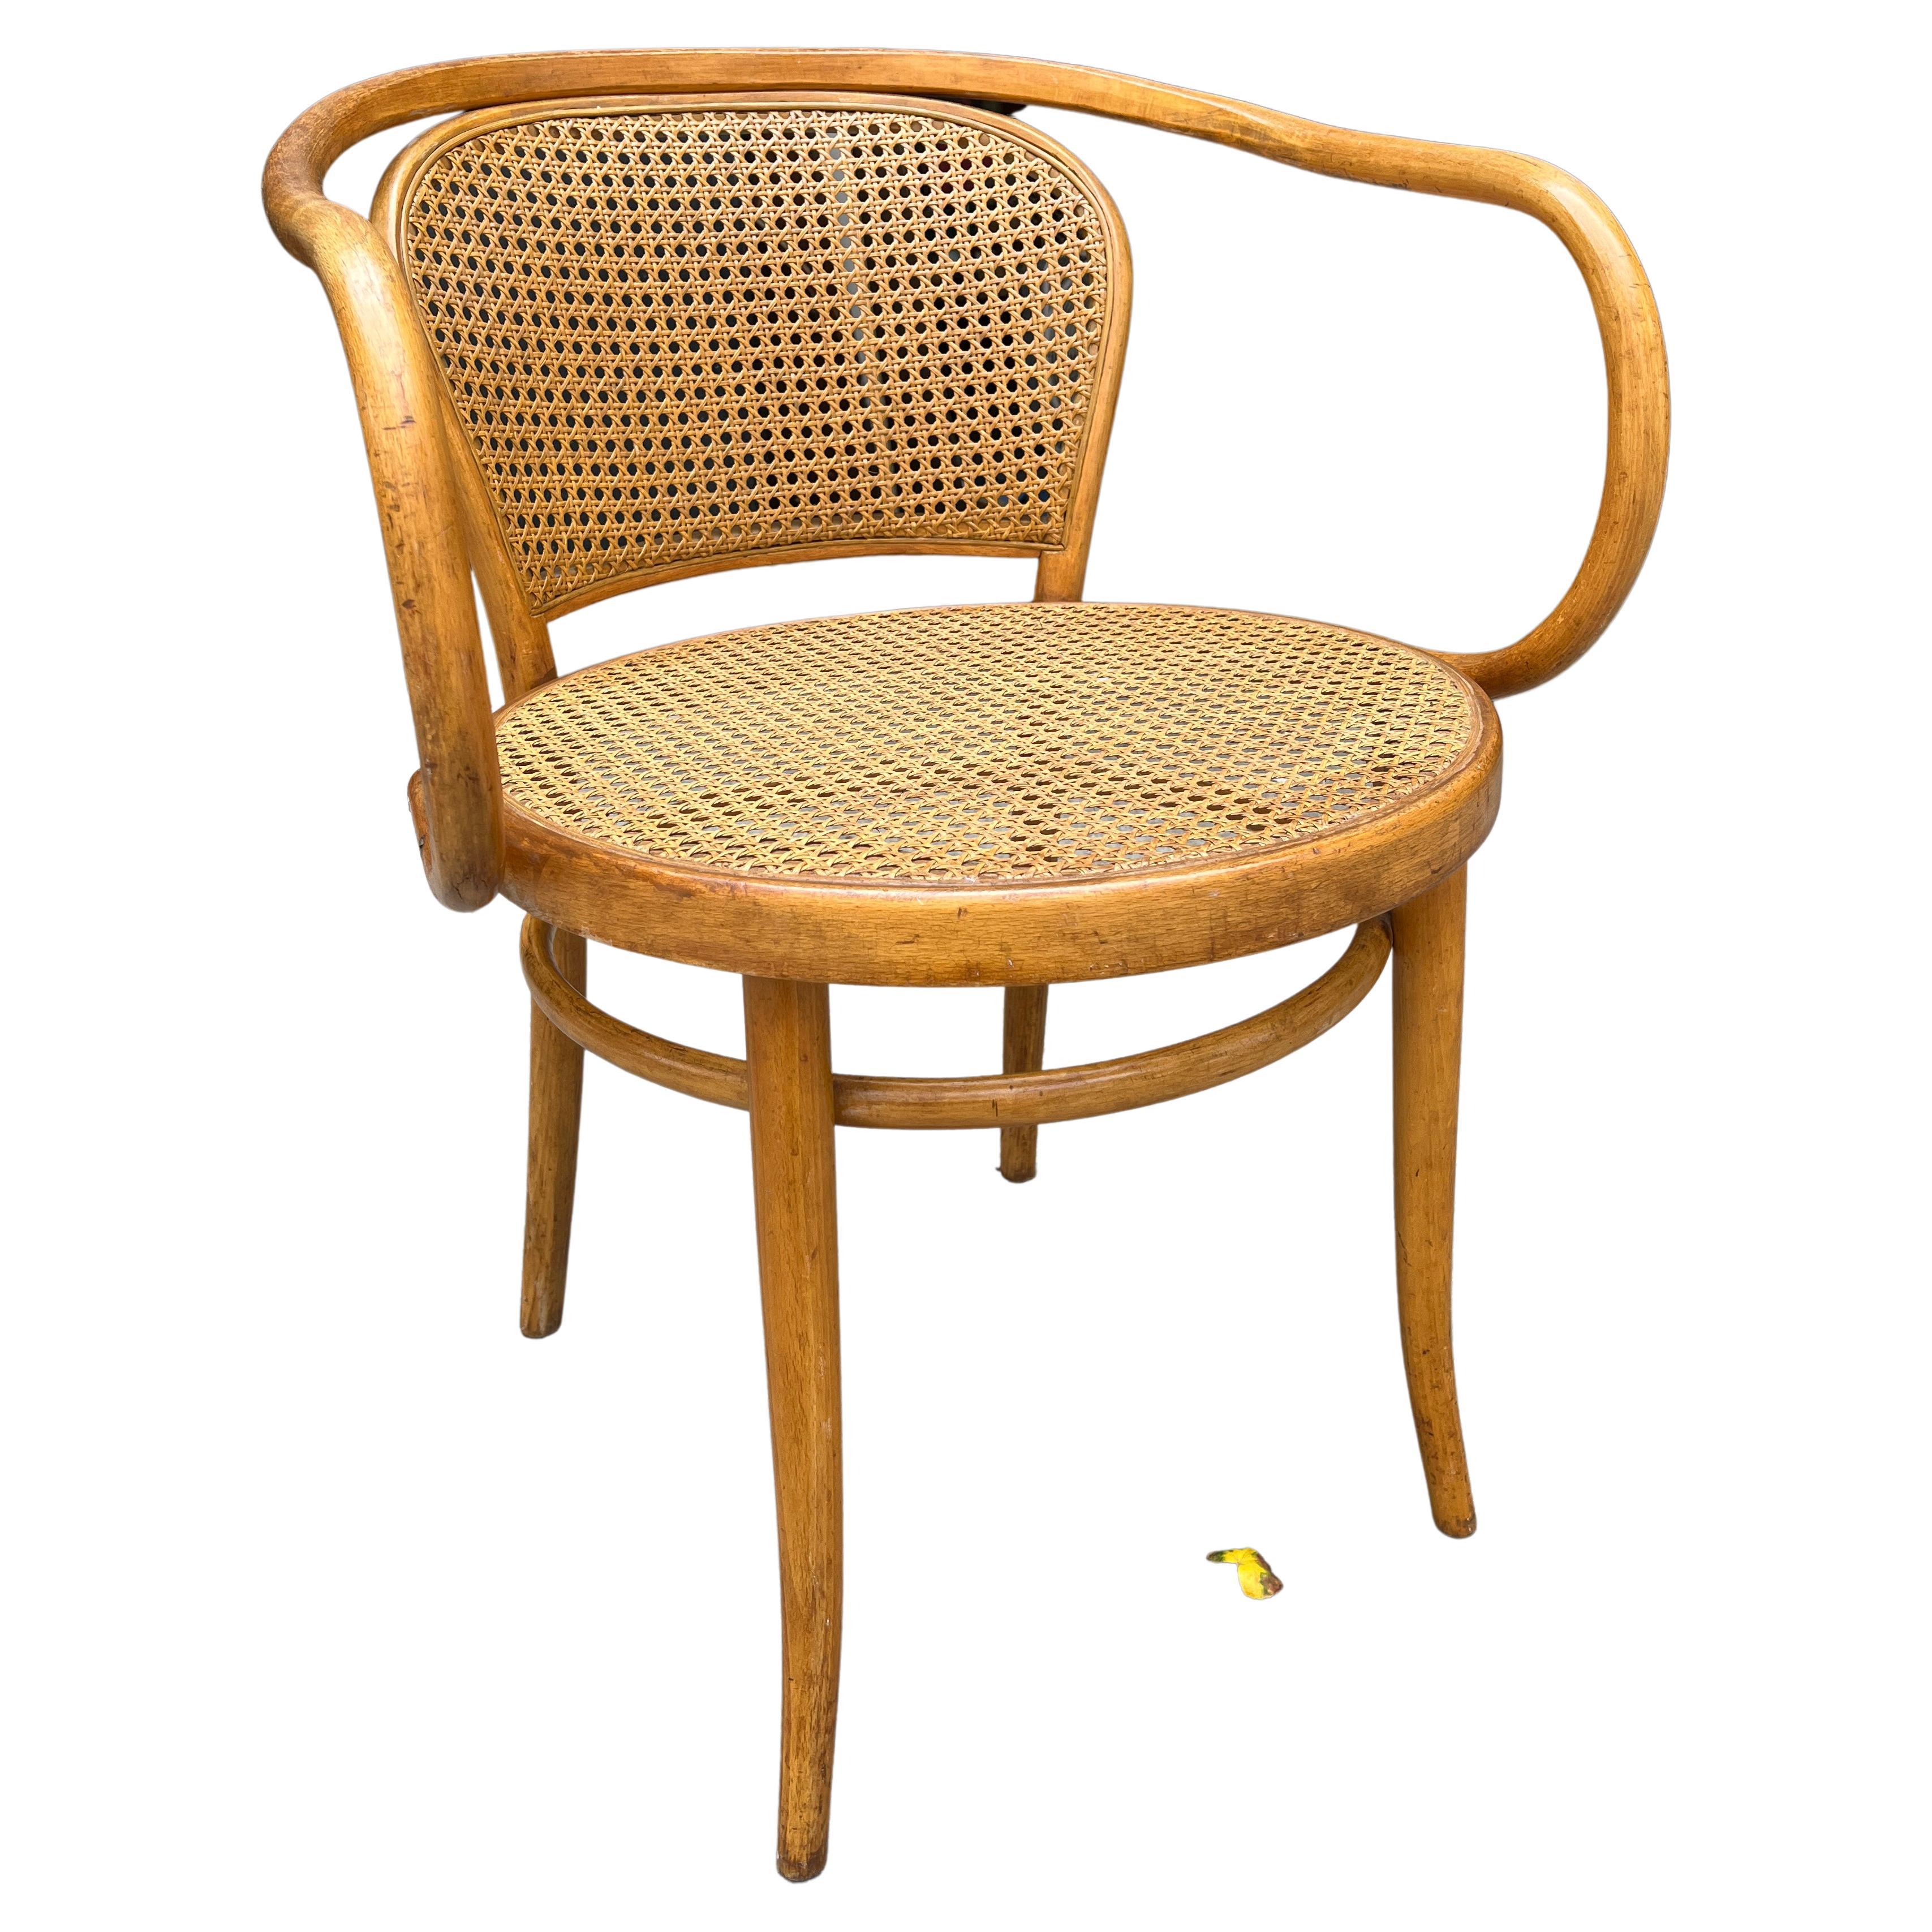  Michael Thonet Solid Beechwood and Cane no. 210 Armchair